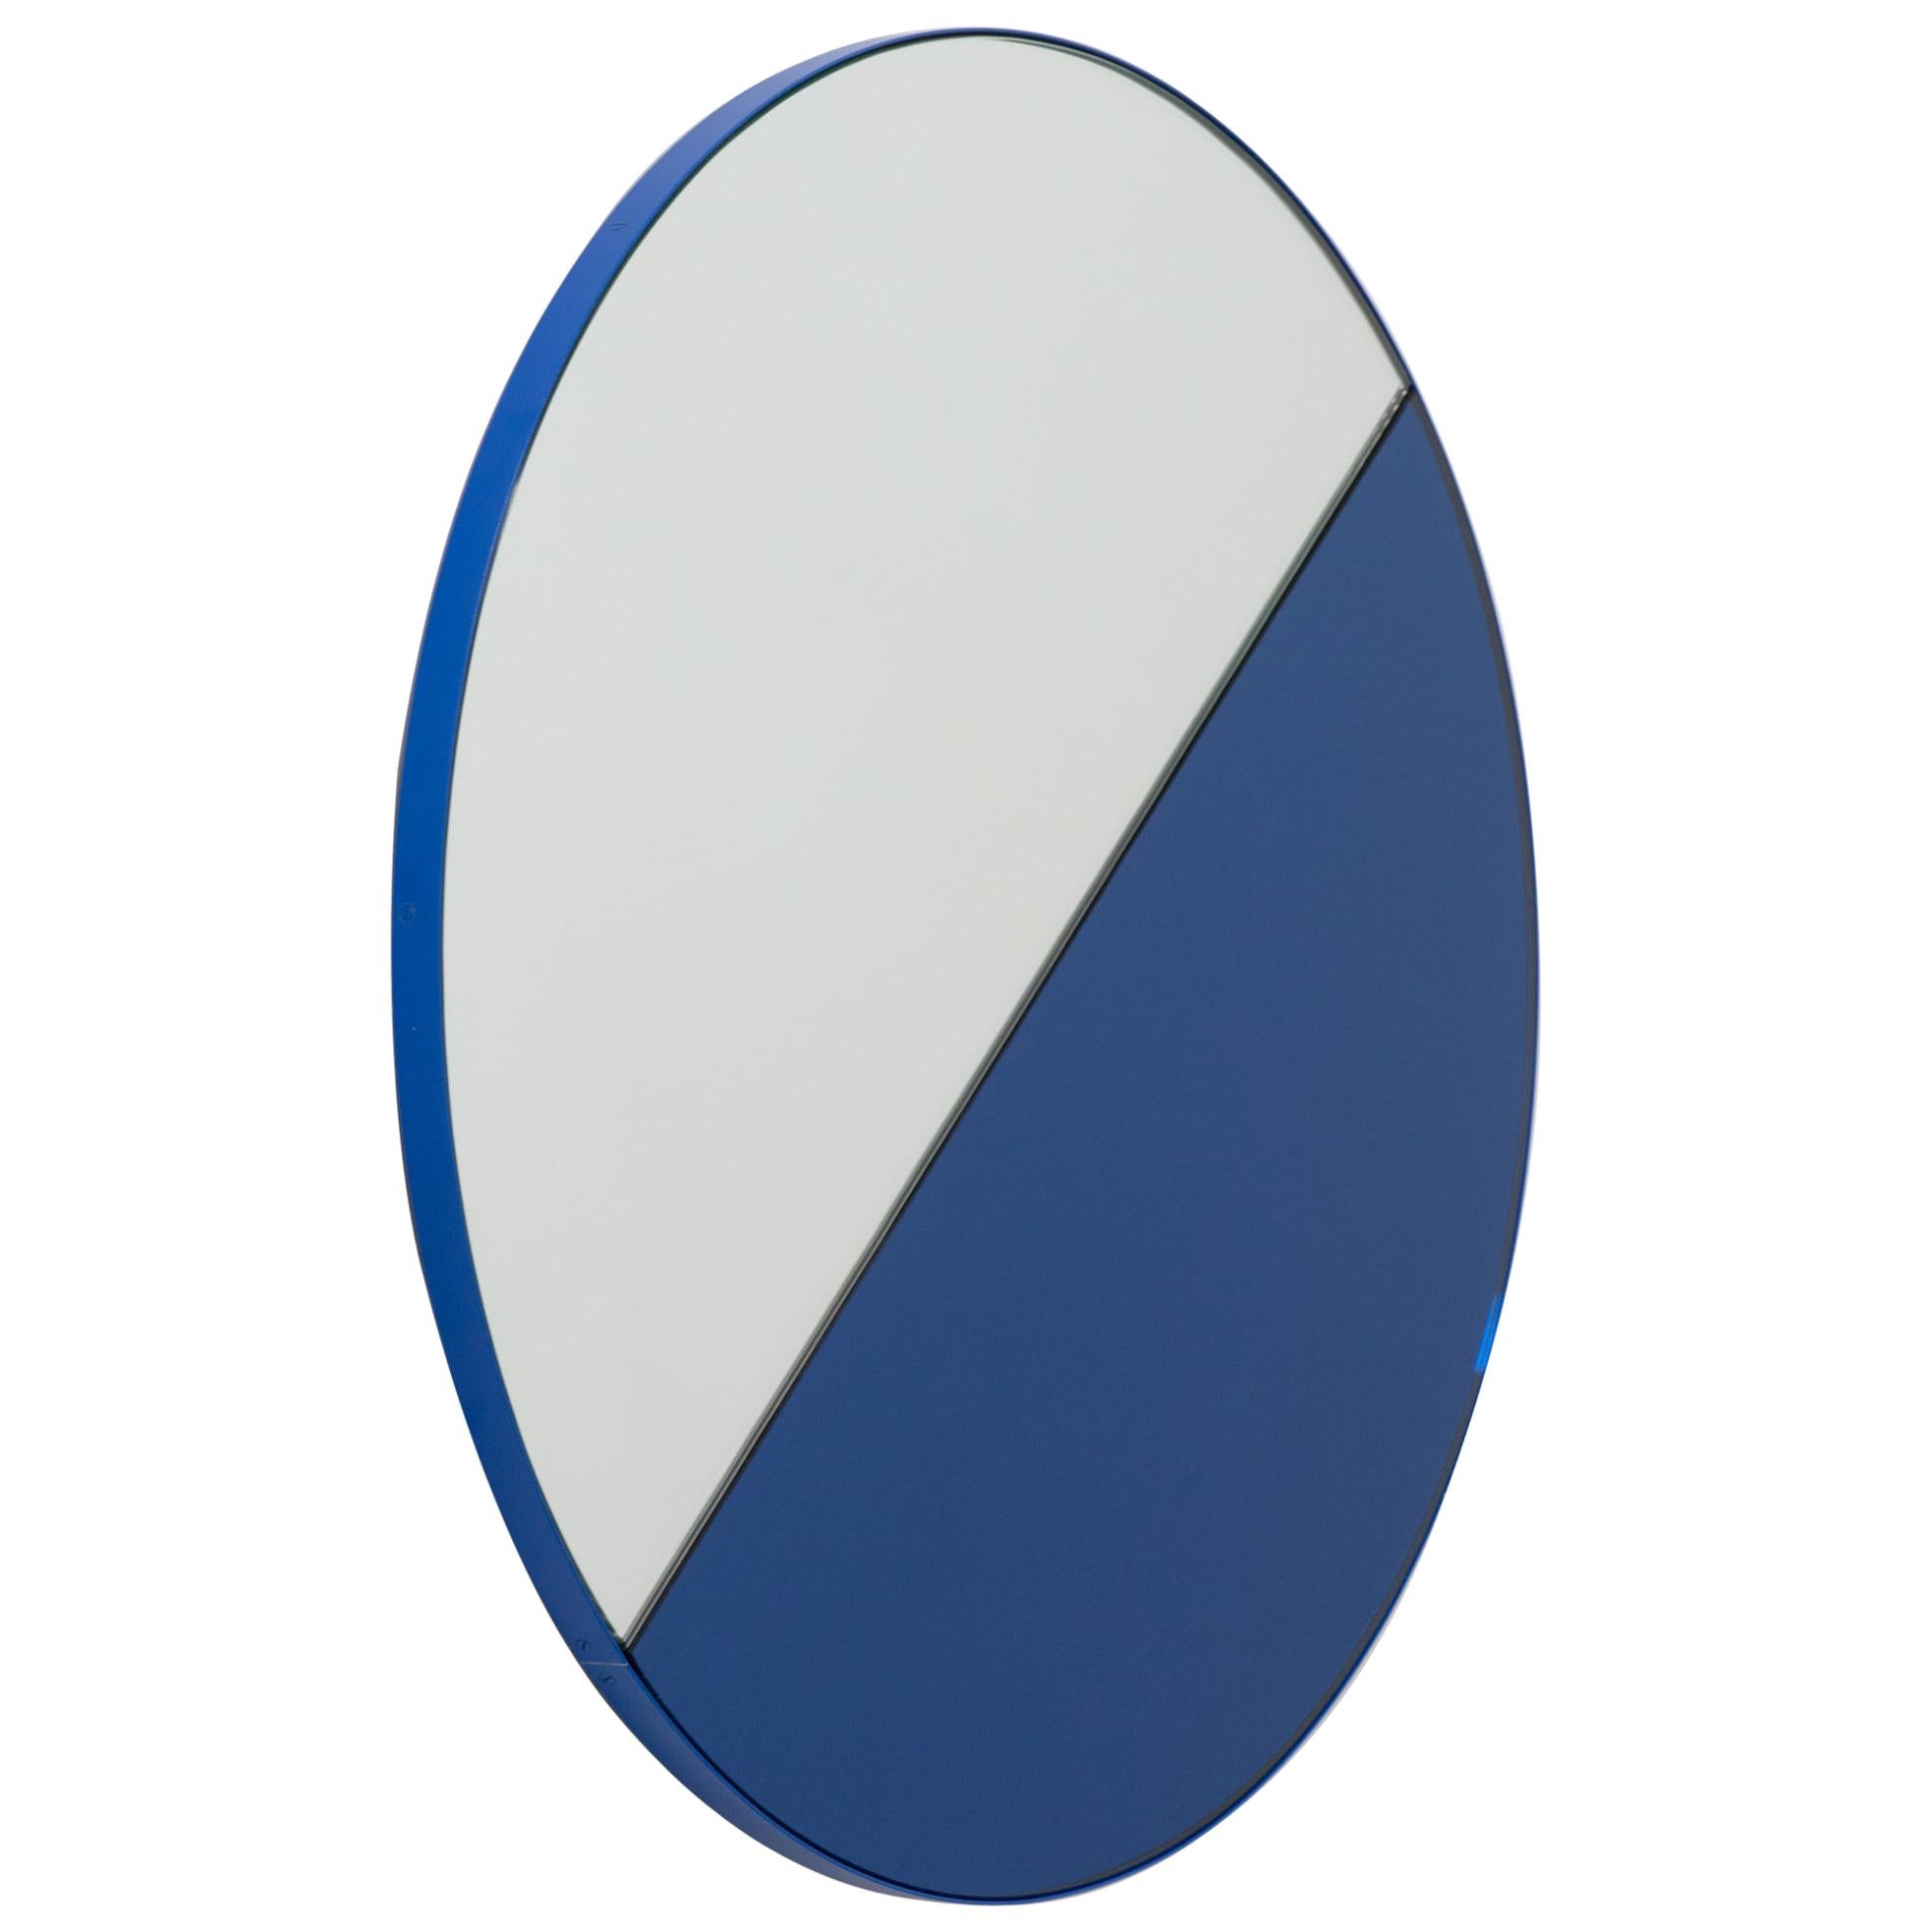 Orbis Dualis Mixed Blue Tinted Contemporary Round Mirror with Blue Frame, Small For Sale